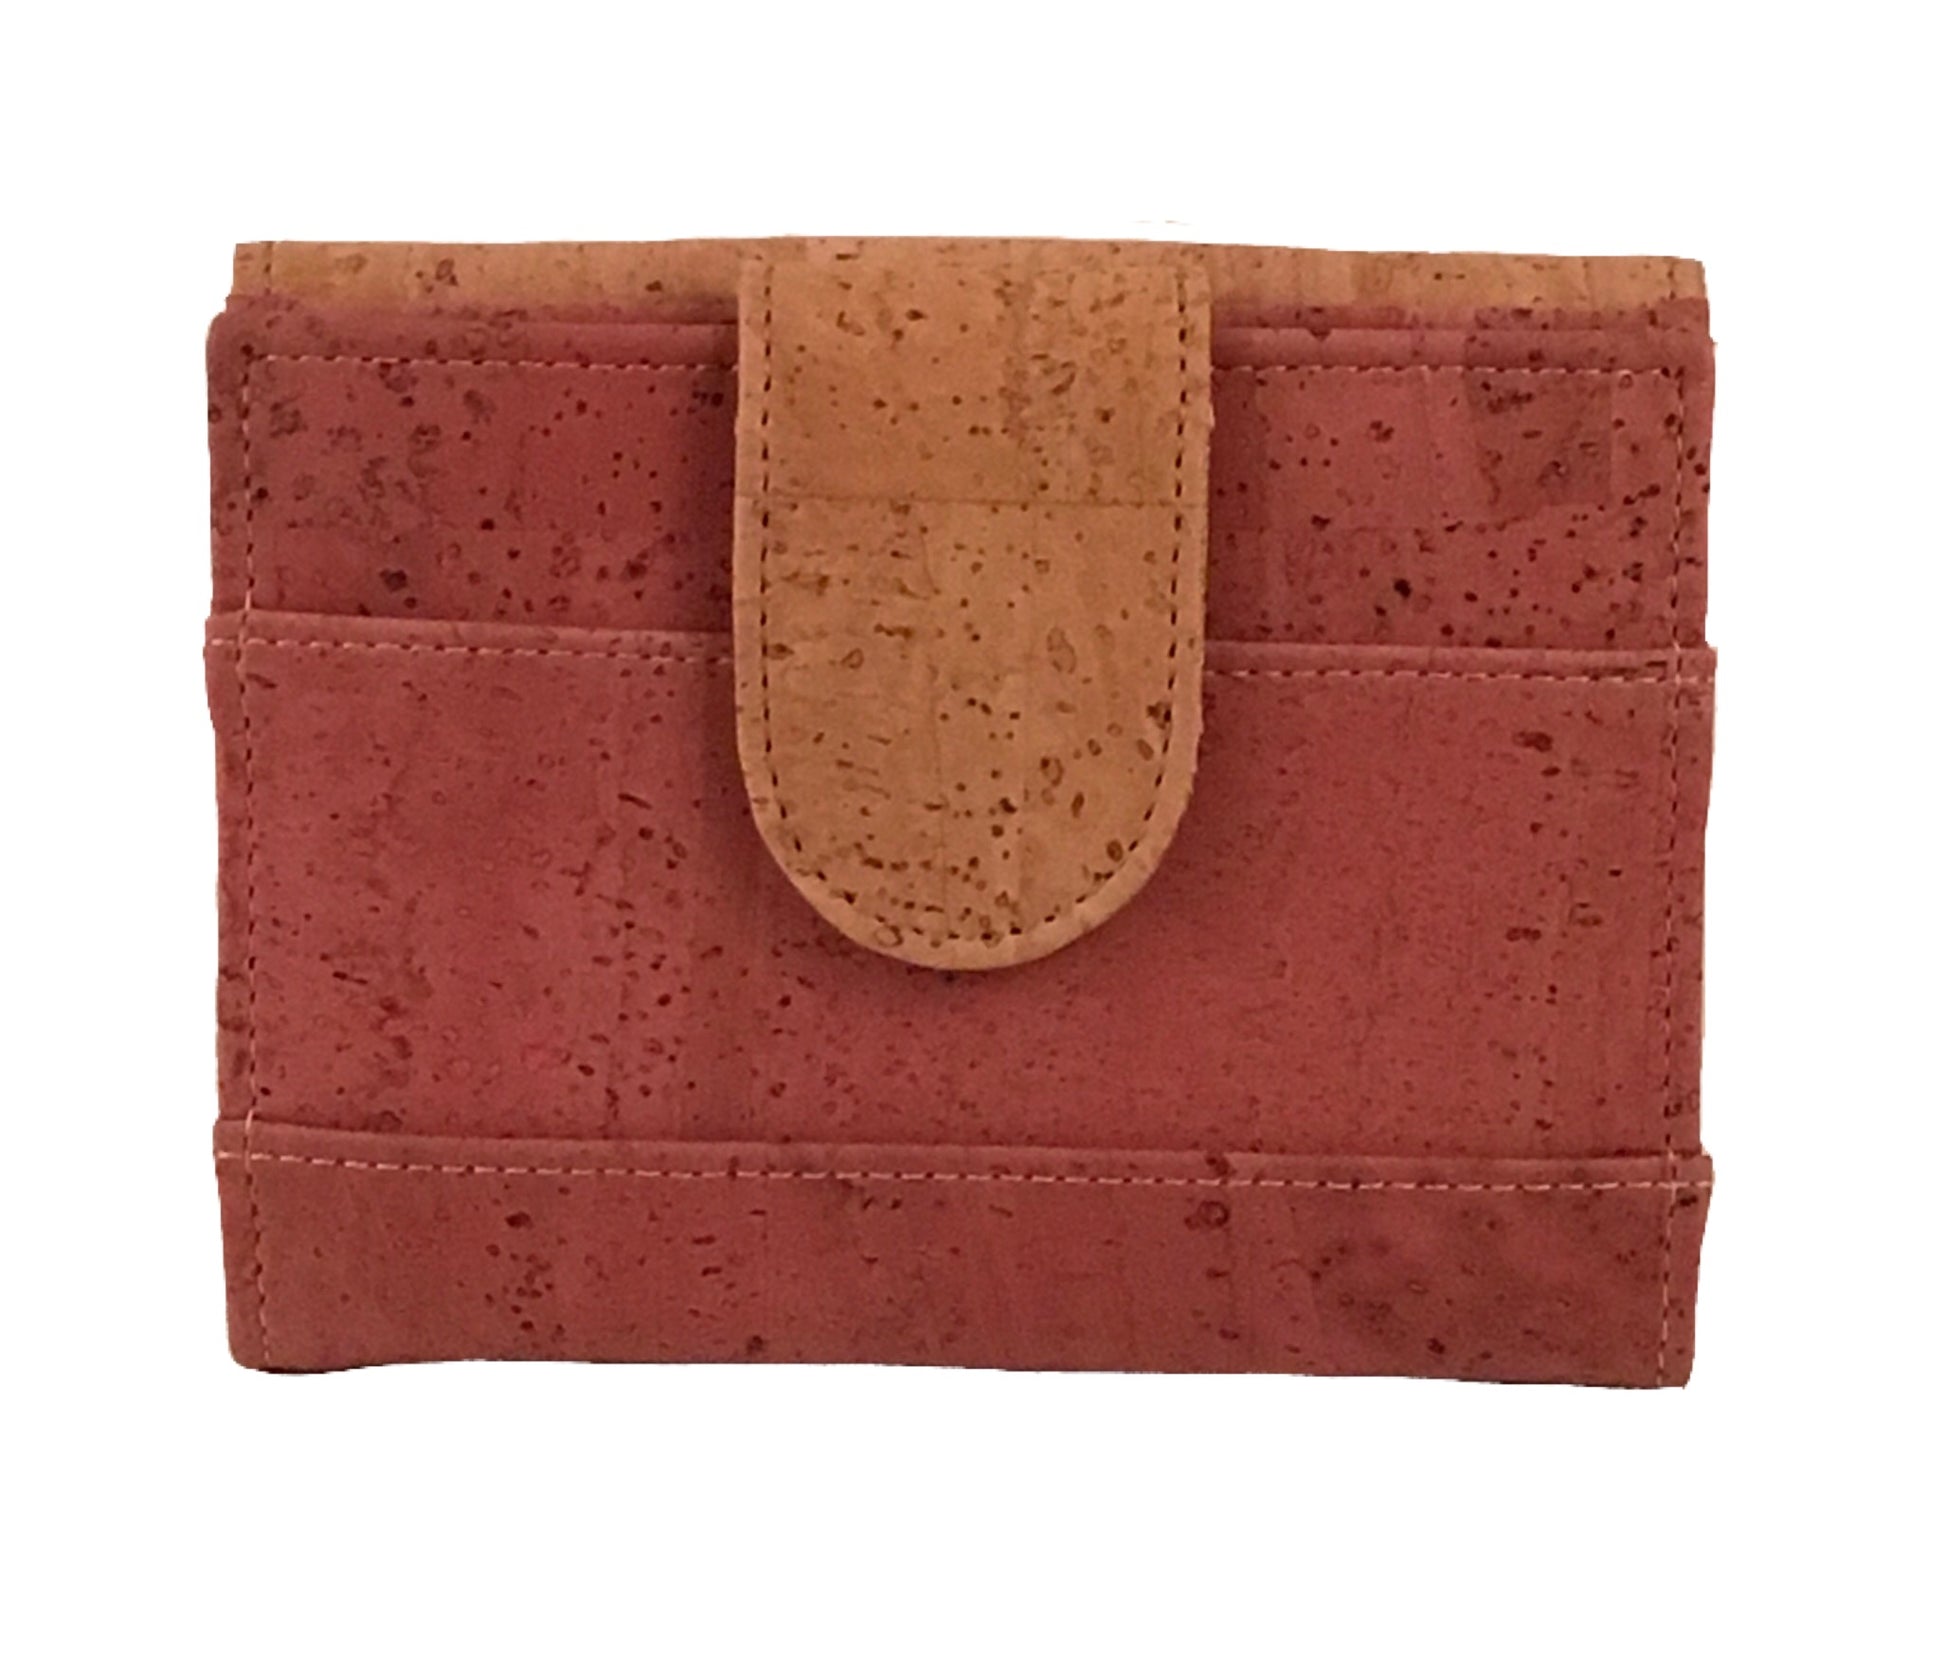 Art For The Cure Pink and Natural Cork Wallet | HowCork - The Cork Marketplace